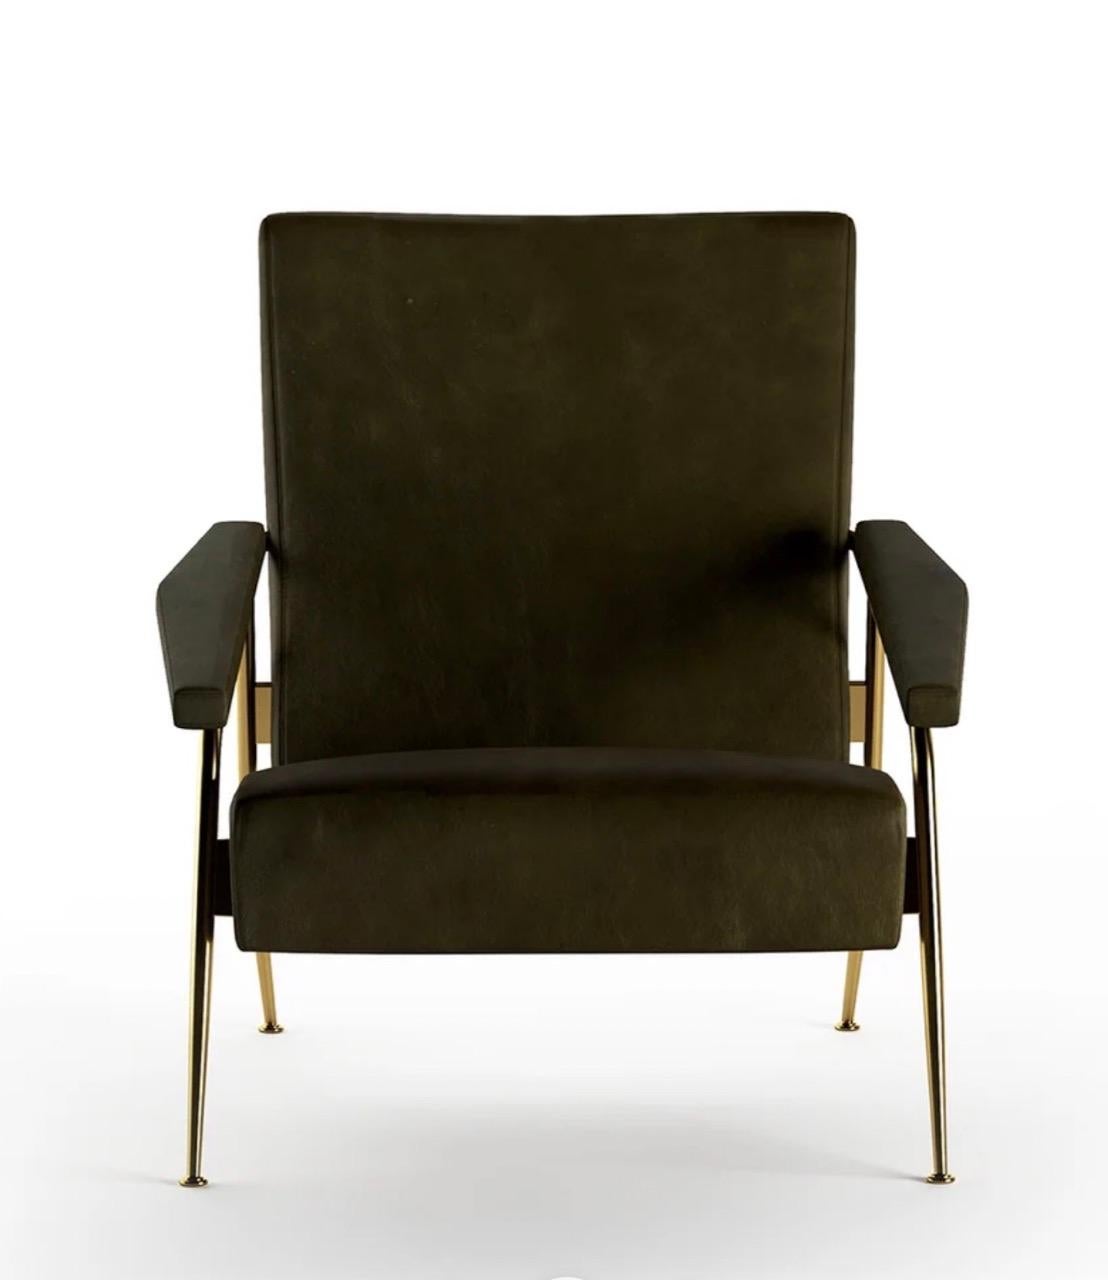 The iconic D.153.1 armchair is a mid-century design by acclaimed Italian designer Gio Ponti. With a high backrest and slight recline, it features a lush fabric mix offering a contemporary look and sophisticated comfort.

-Made in Italy
-Brass